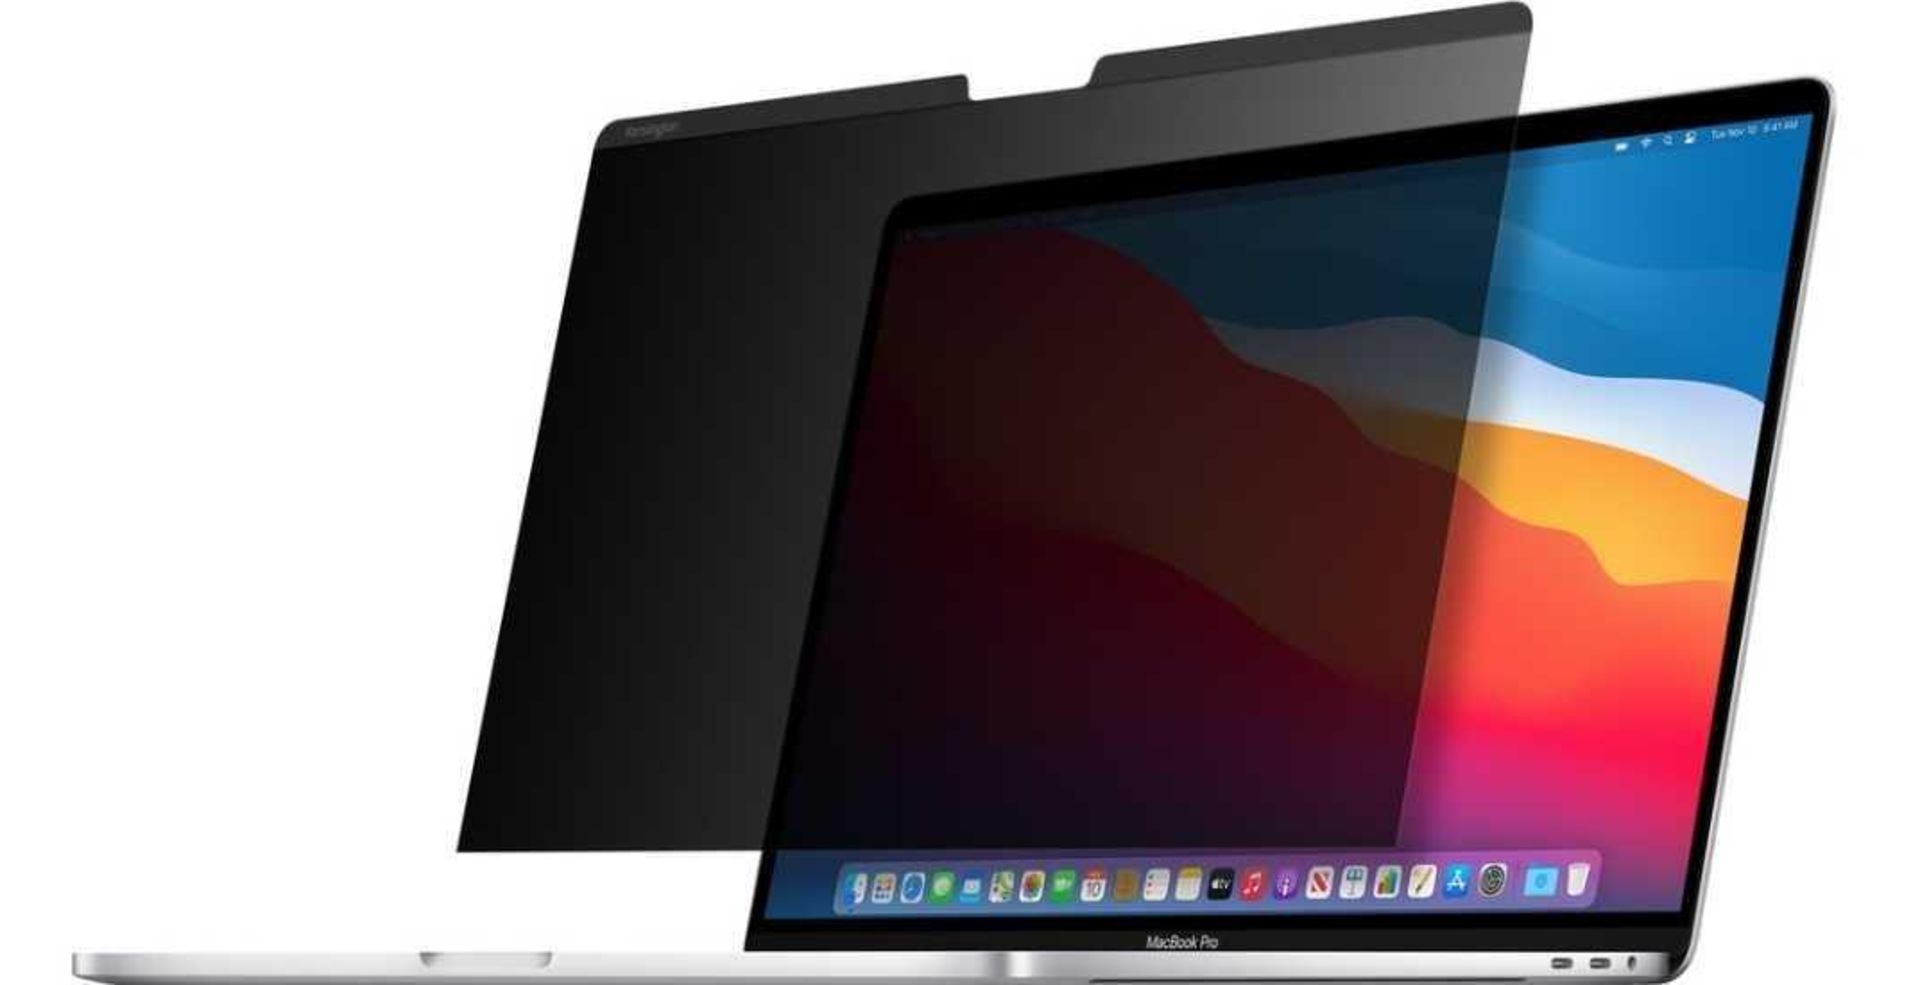 RRP £200 Lot To Contain 4 Brand New Kensington Ultra Thin Magnetic Privacy Screens For Macbook Pro 1 - Image 2 of 2